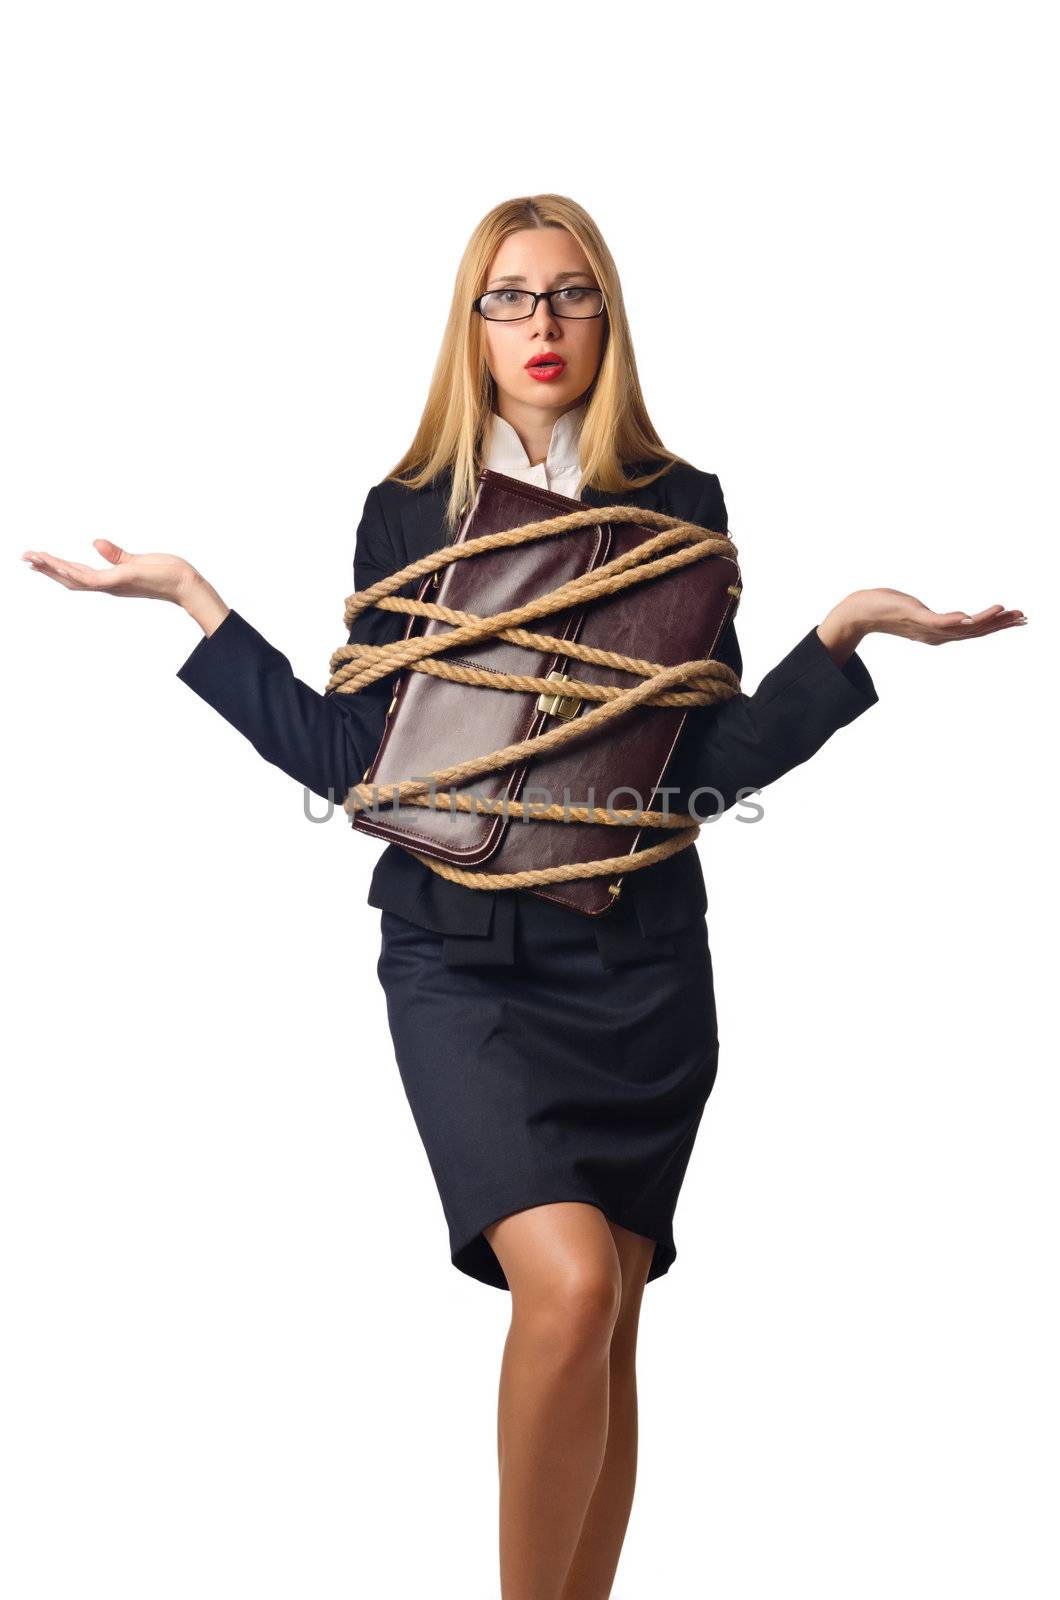 Woman businessman tied up with rope